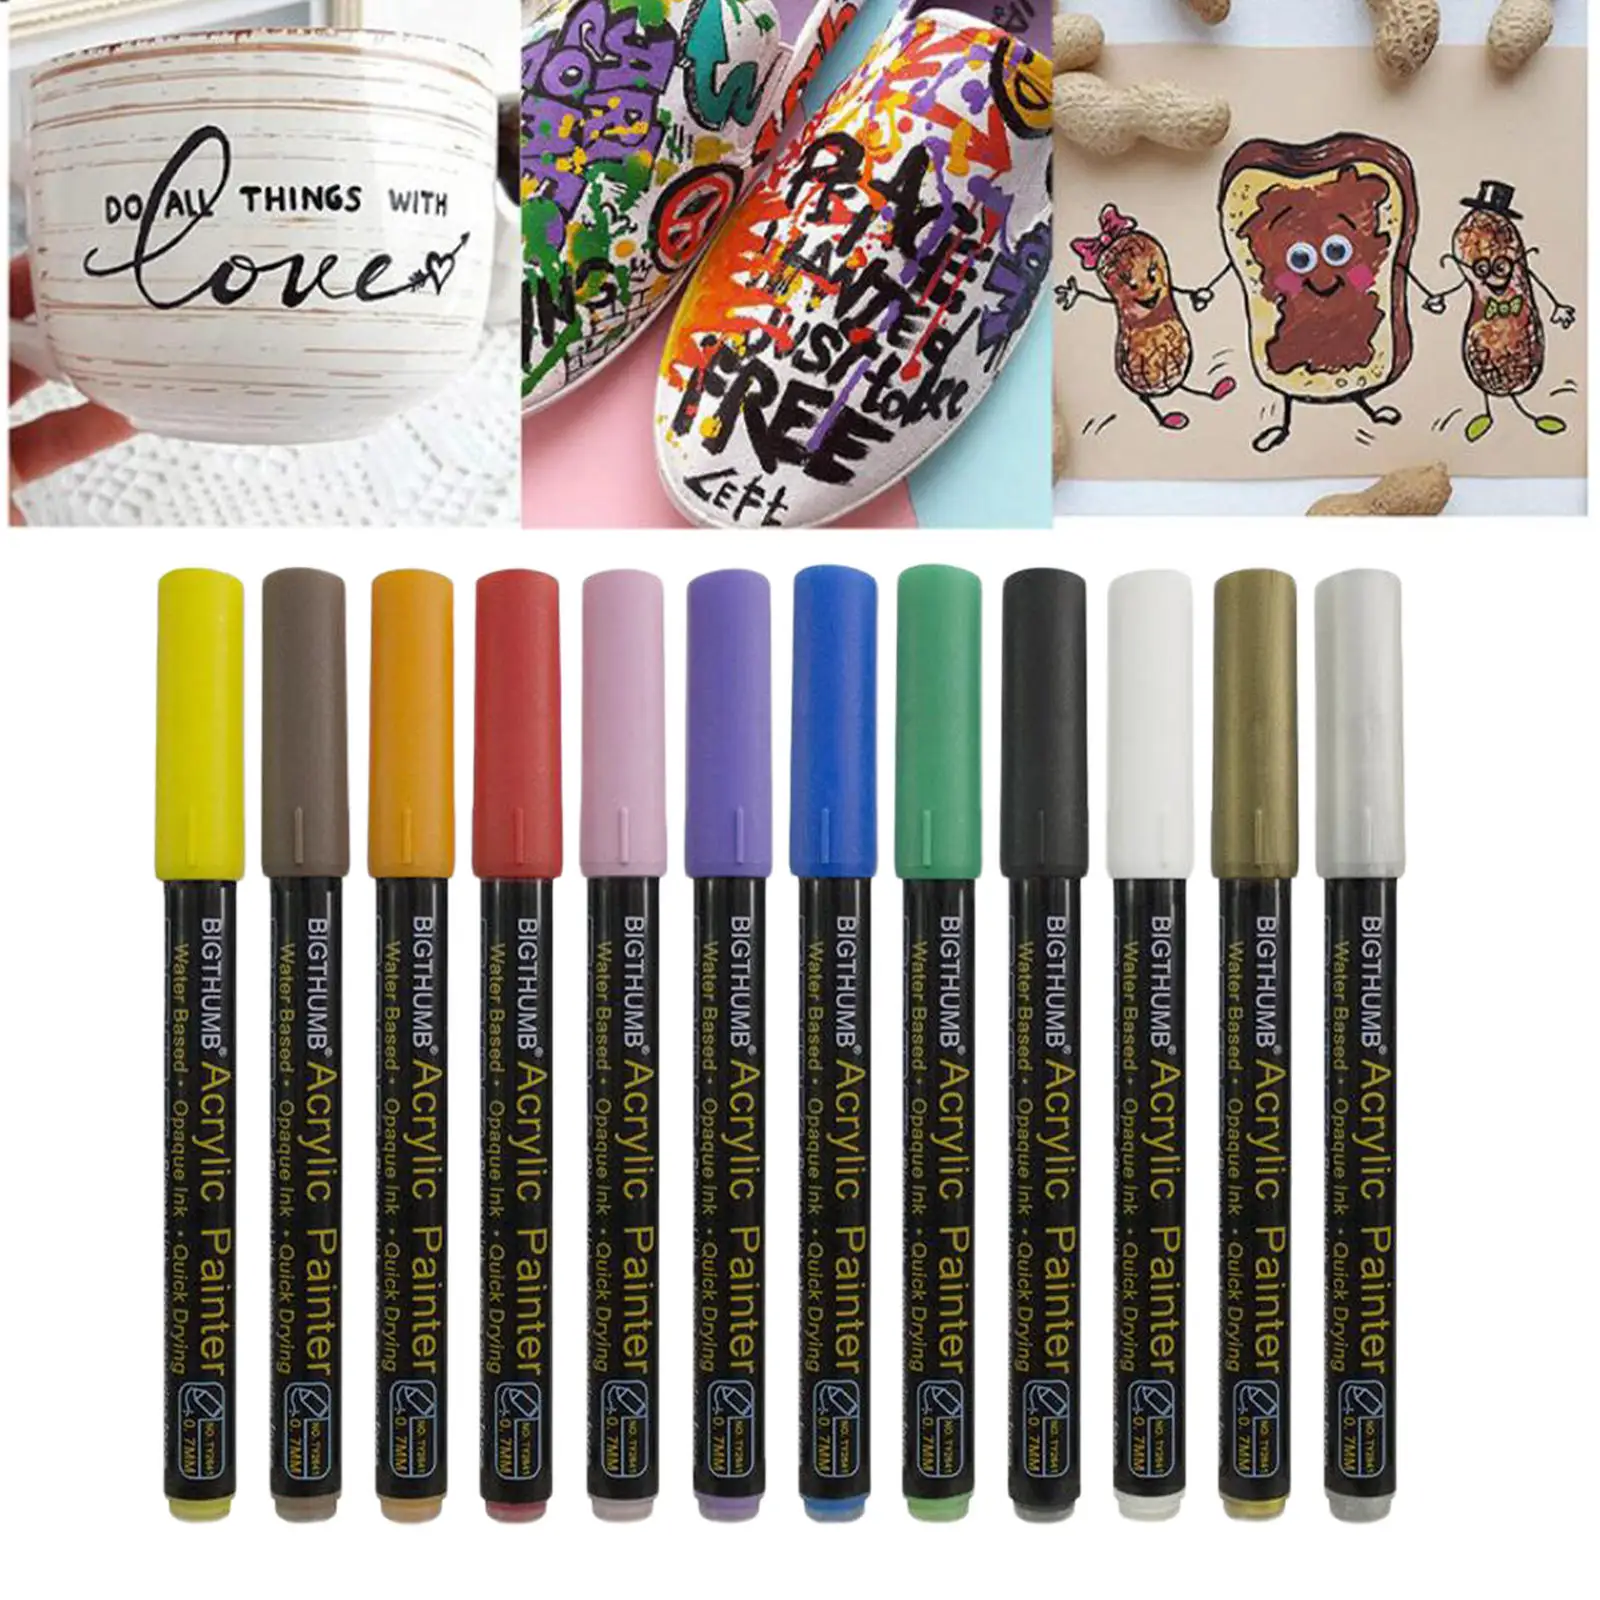 12 Colors Acrylic Paint Marker Pens Permanent 0.7mm DIY Craft Set Water based Quick Dry for Ceramic Canvas Easter Egg Mug Paper